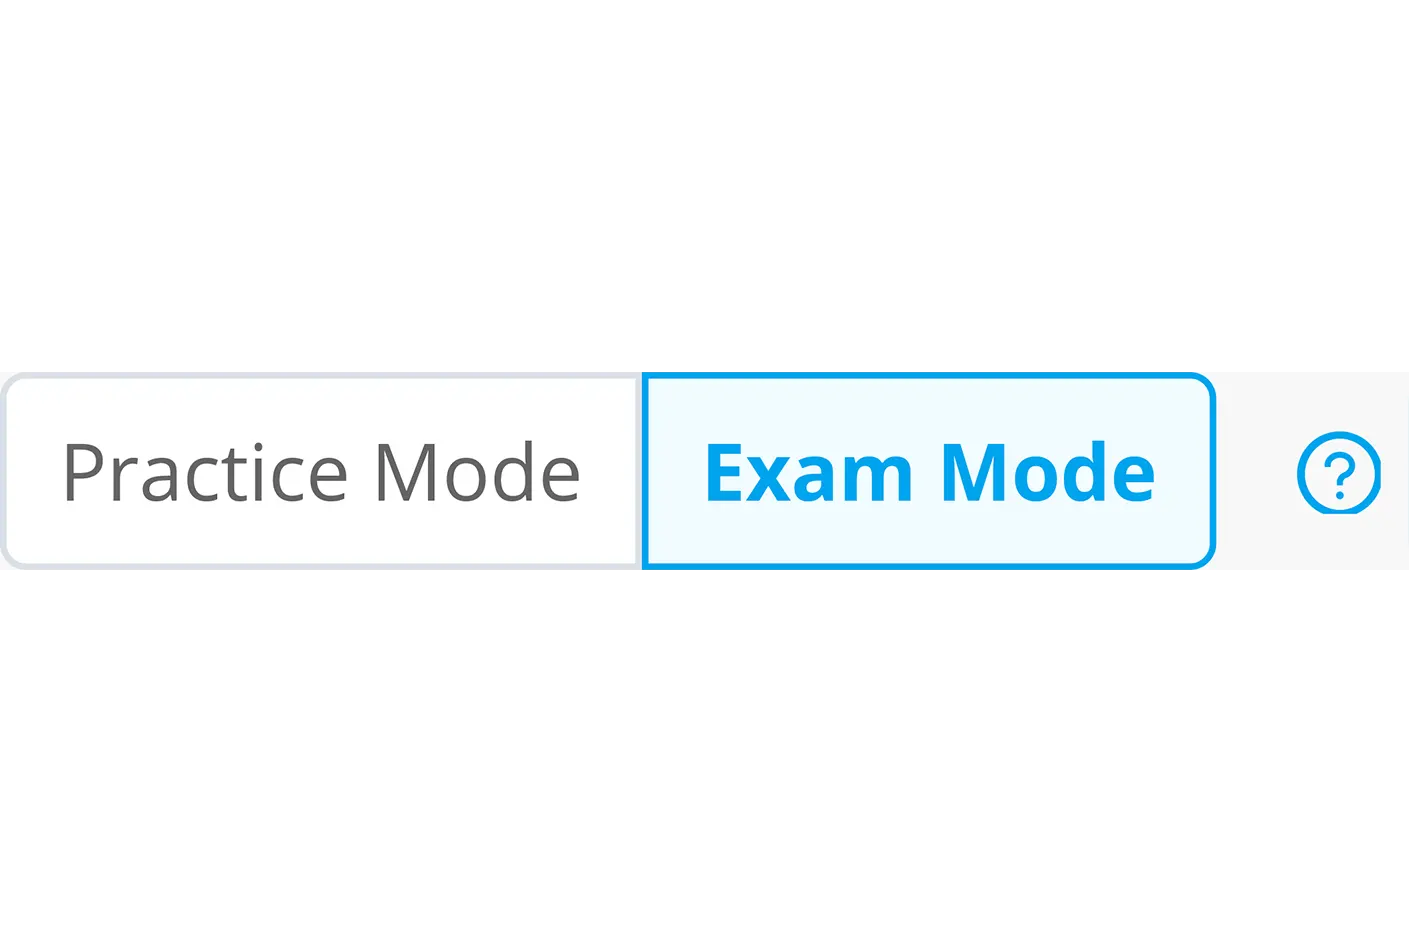 There is a screenshot of exam mode select for Public Service Test practice test